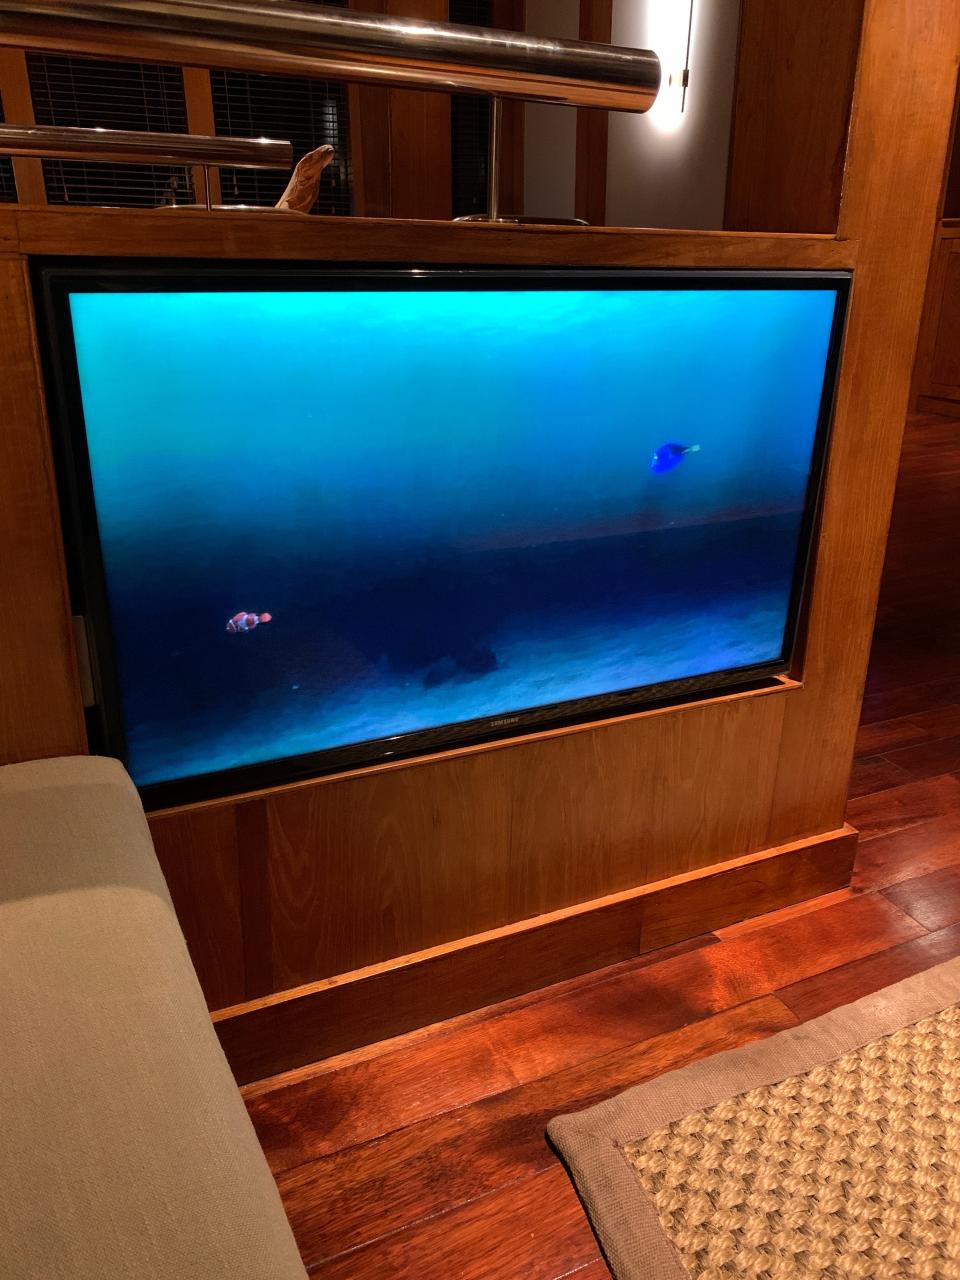 A flatscreen TV with an image of fish swimming on it.